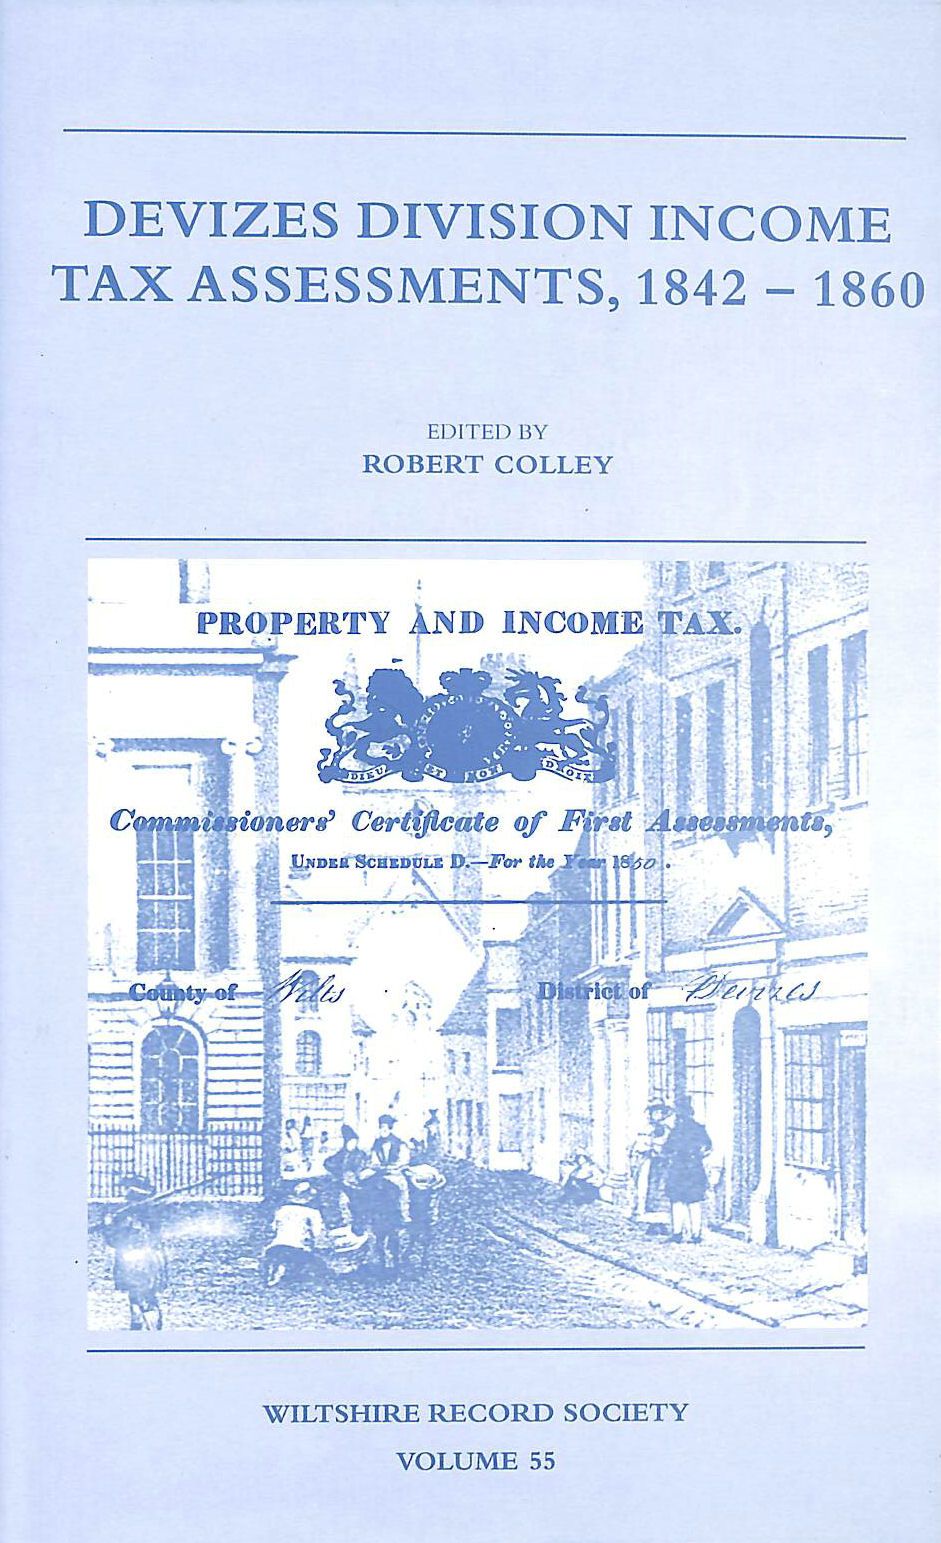 COLLEY, ROBERT [EDITOR] - Devizes Division Income Tax Assessments, 1842-1860 (Wiltshire Record Society)